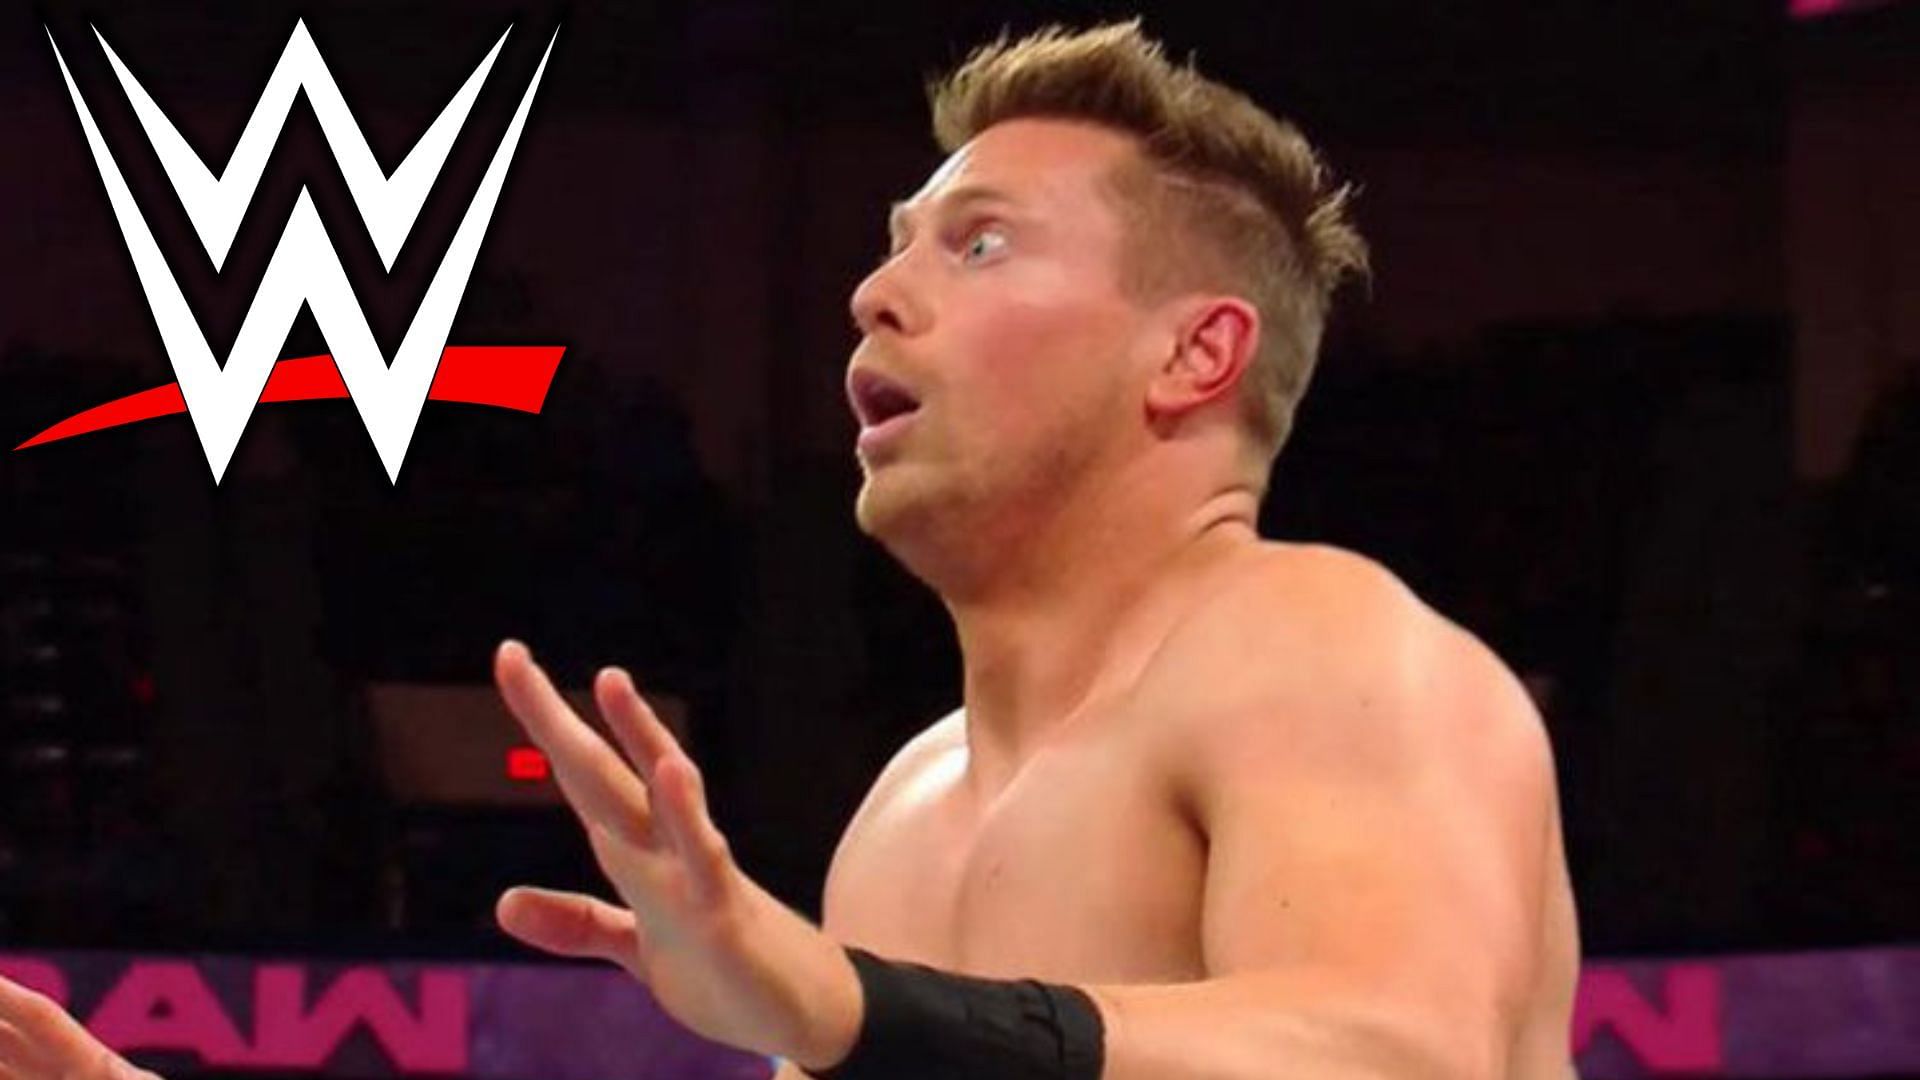 The Miz is well-known for his underhanded tactics.